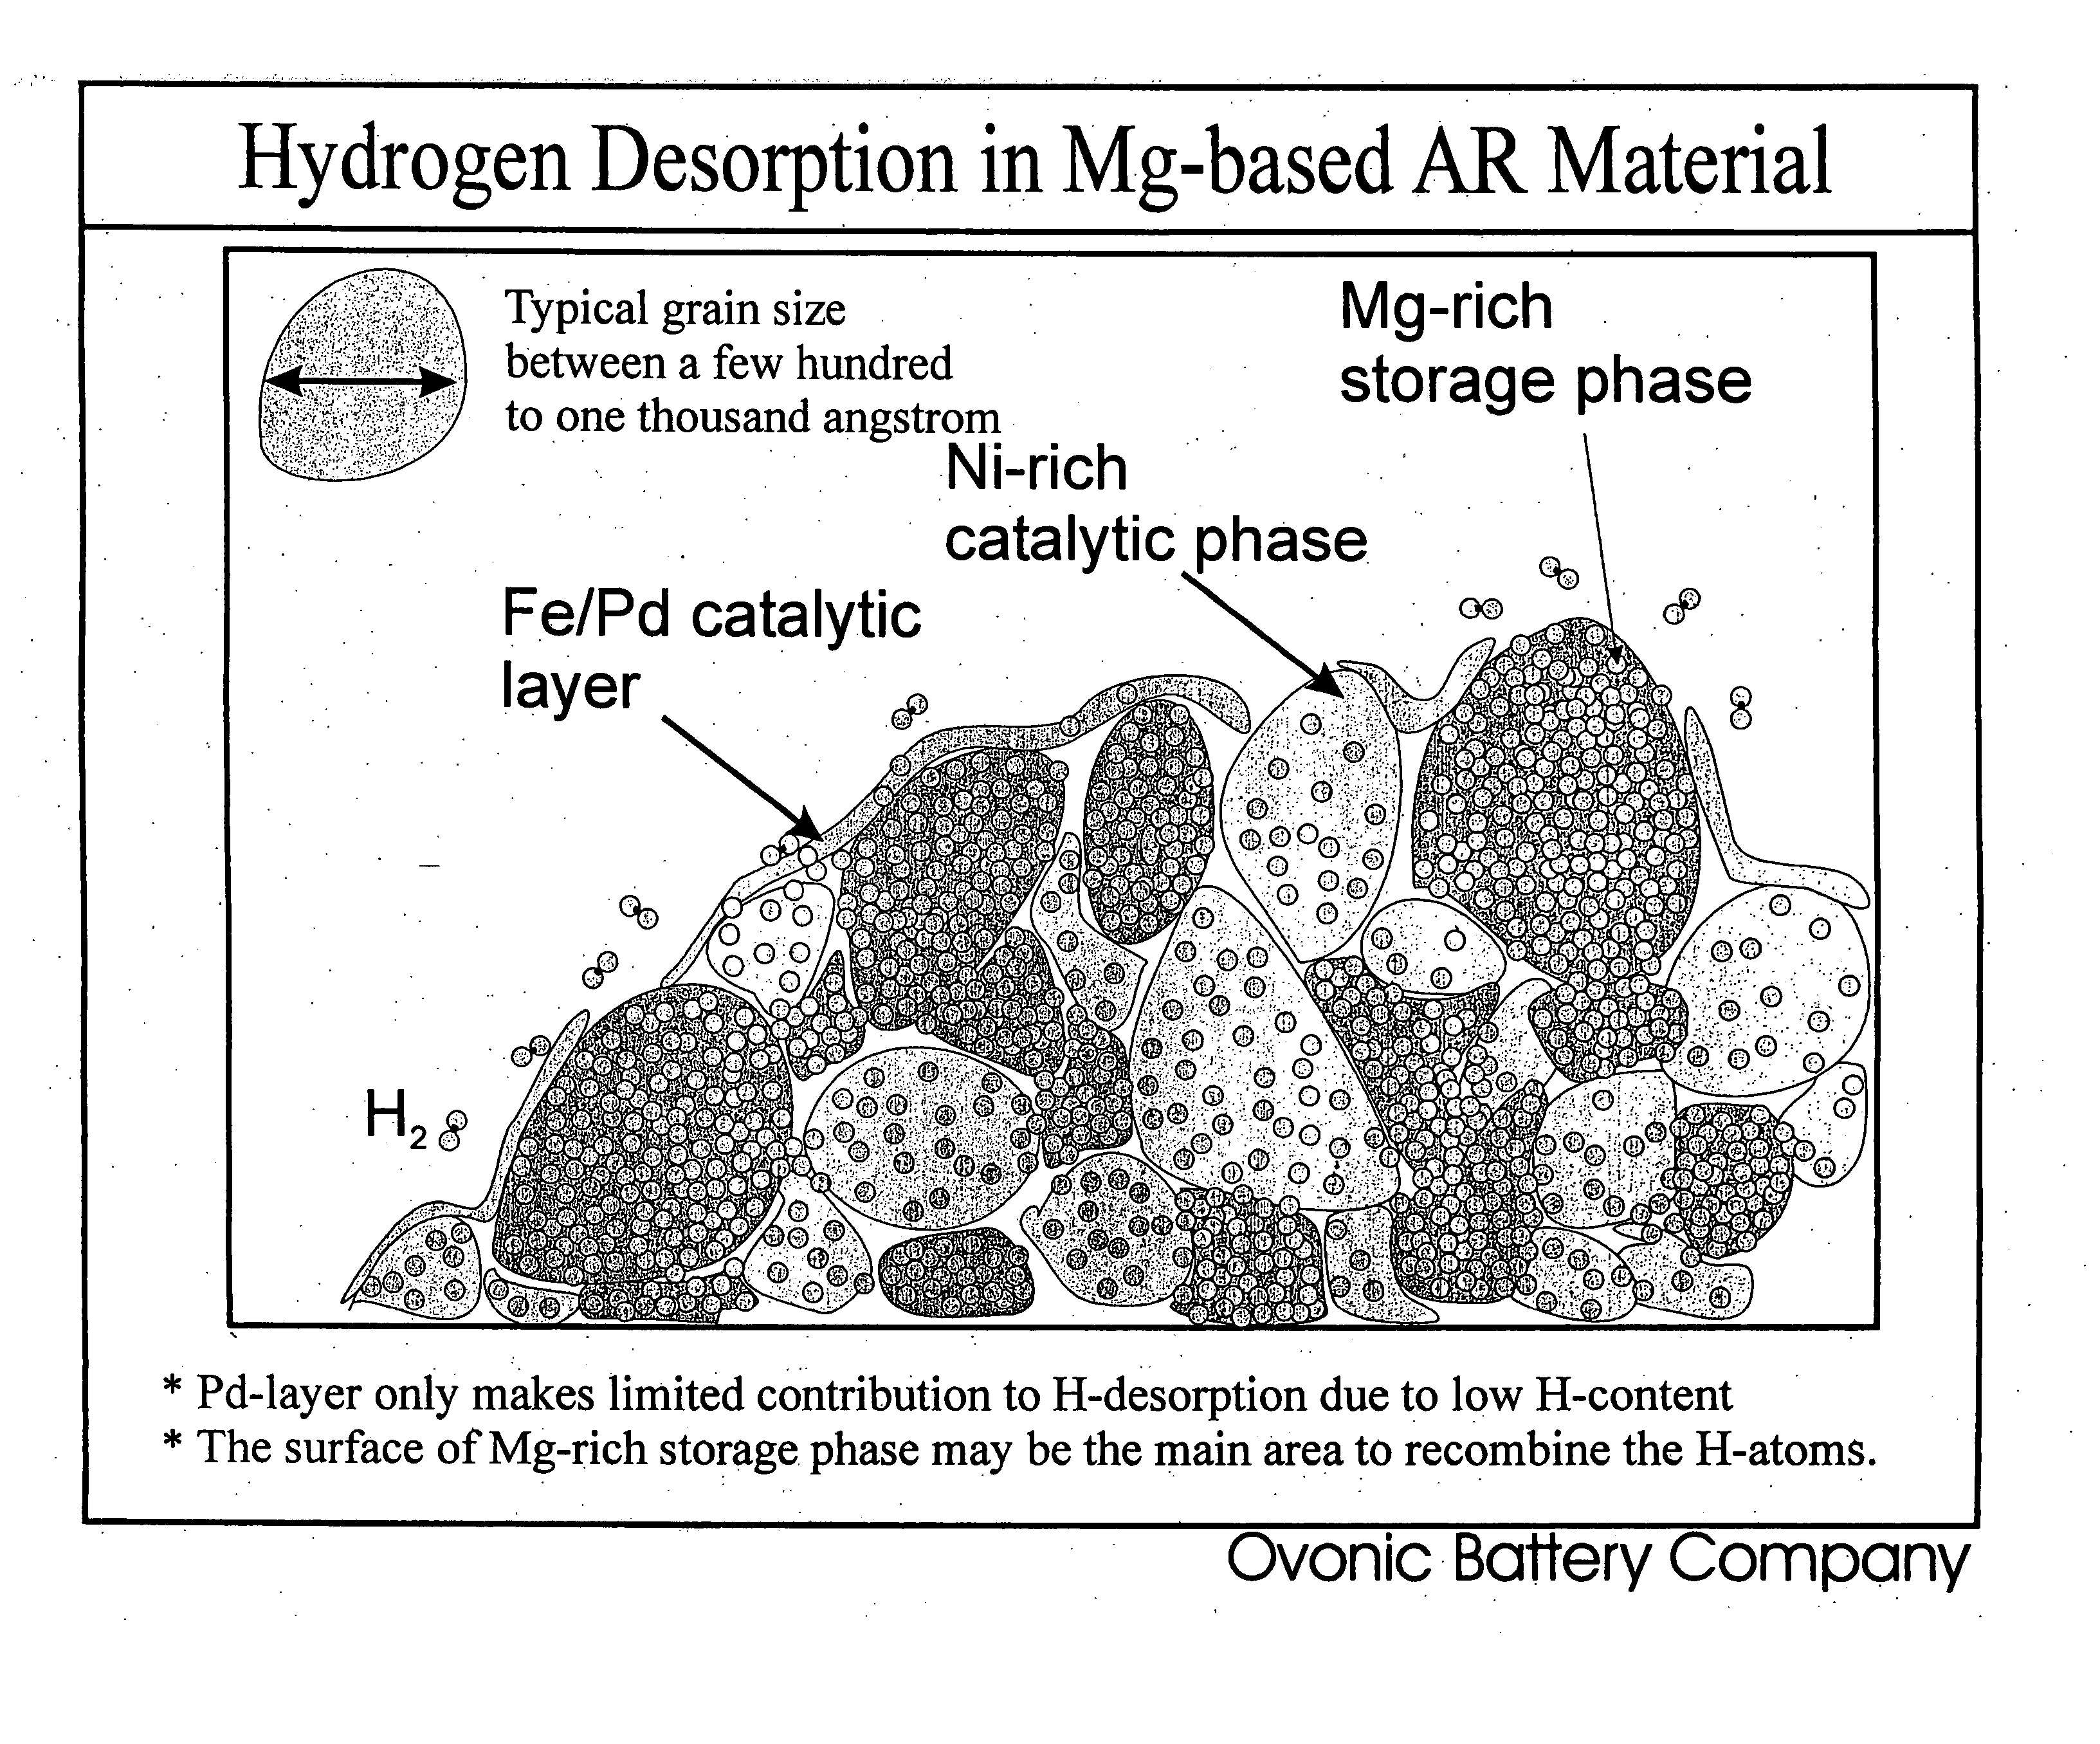 Mg-Ni hydrogen storage composite having high storage capacity and excellent room temperature kinetics